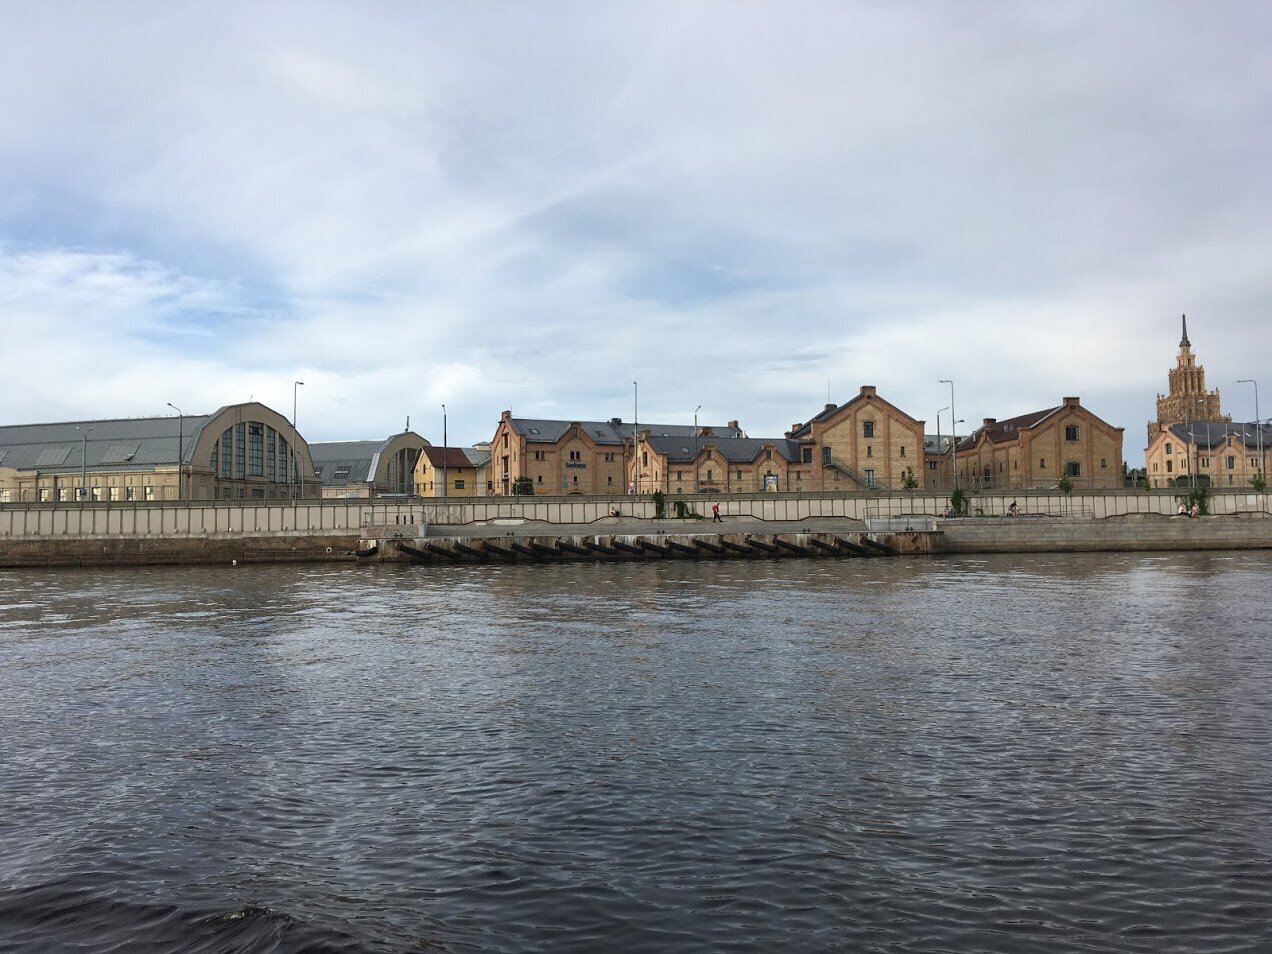 View of Maskavas forstadt from the River Daugava. Central Market, Spikeri, Academy of Sciences